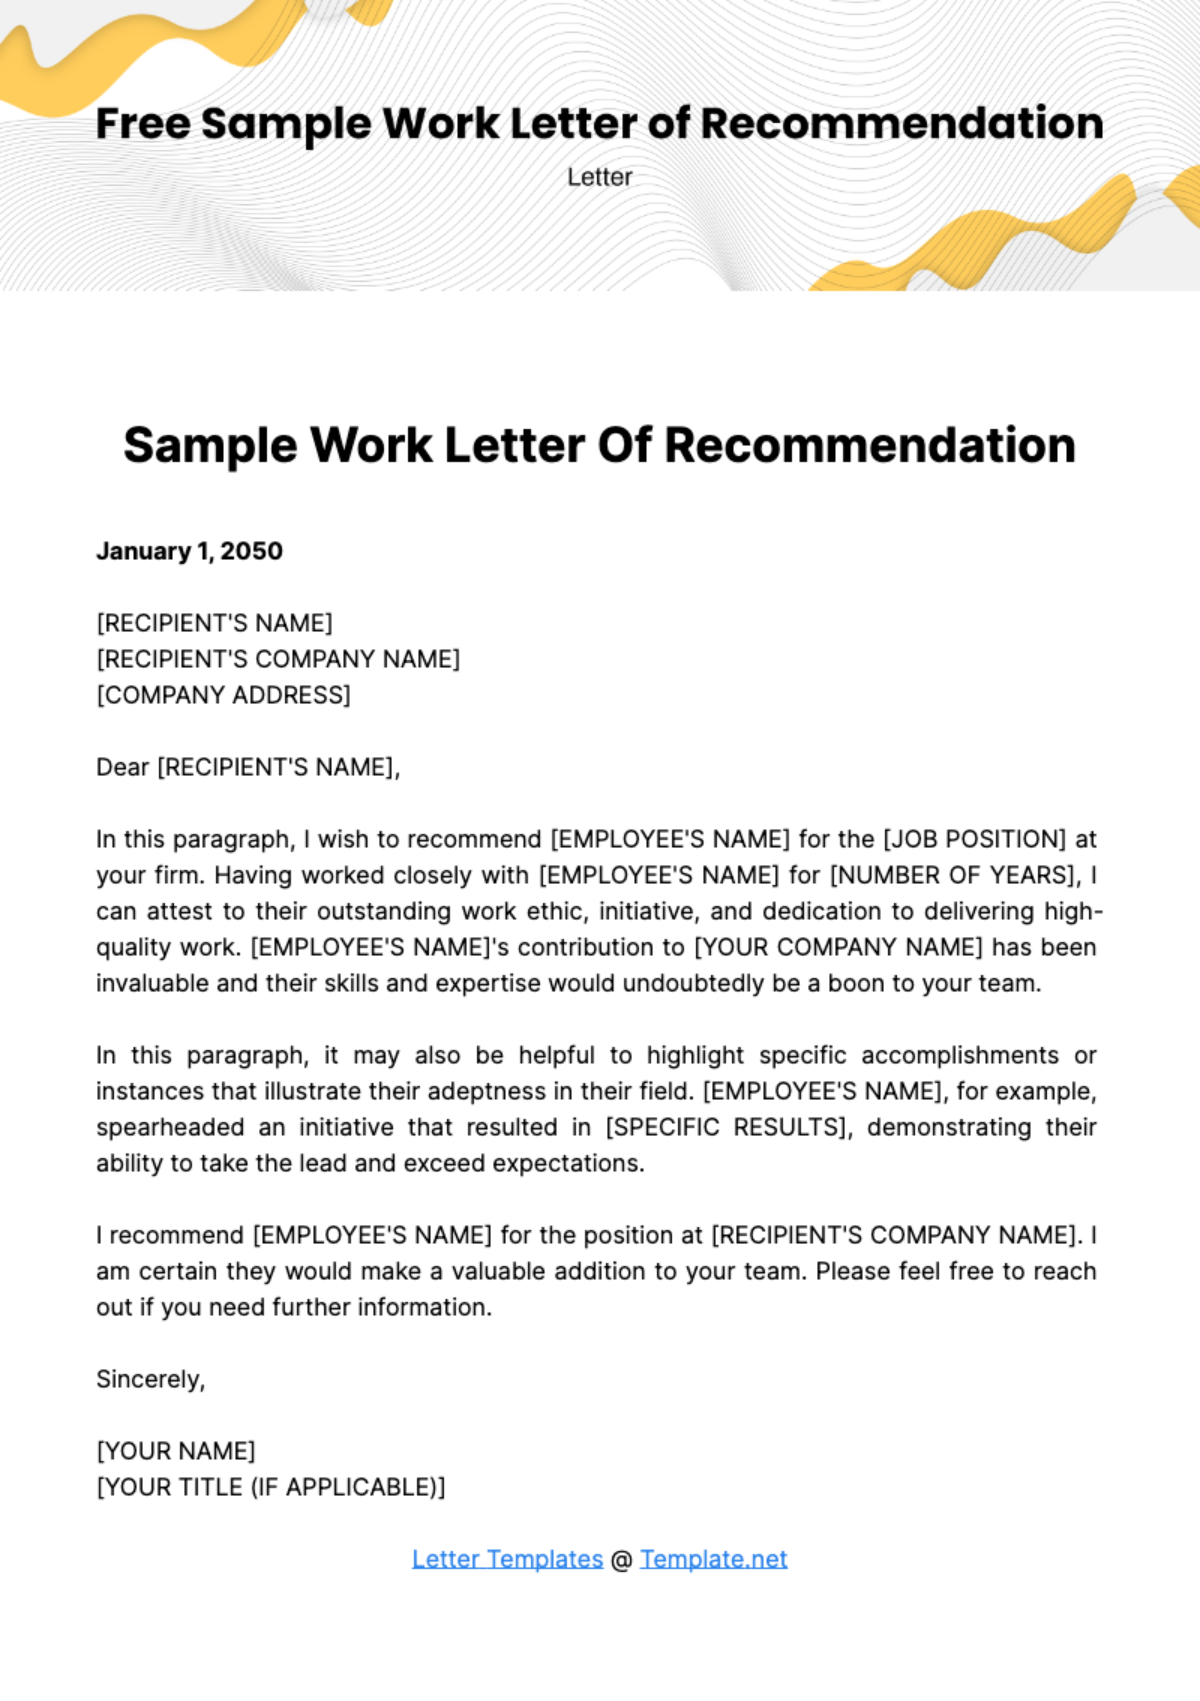 Sample Work Letter of Recommendation Template